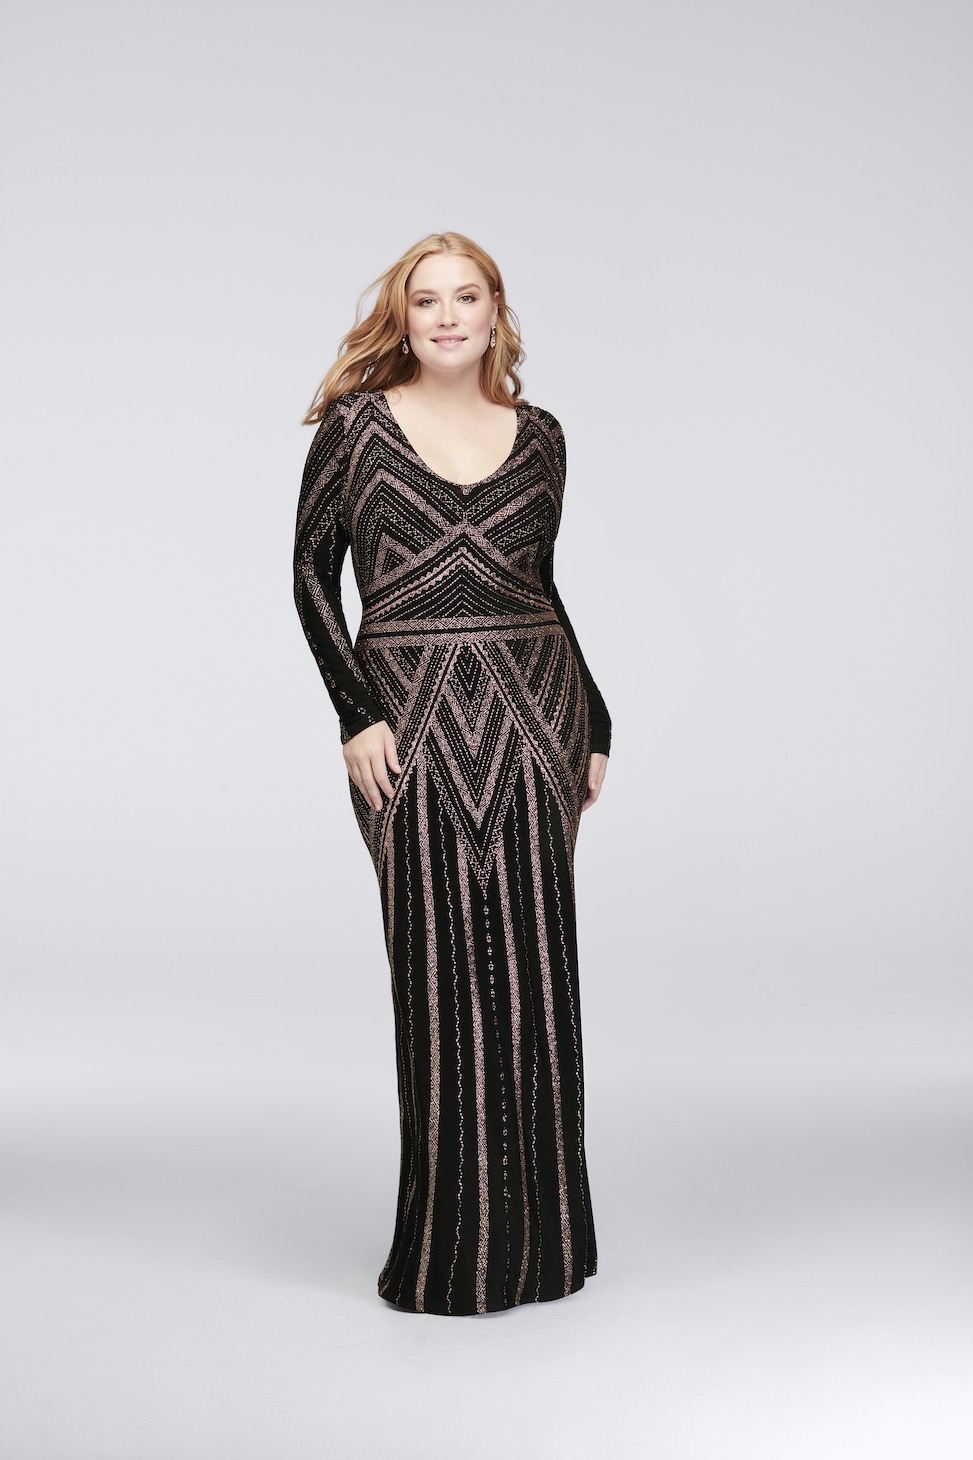 plus size model wearing long sleeve black scoop neck evening gown with art deco geometric details from david's bridal